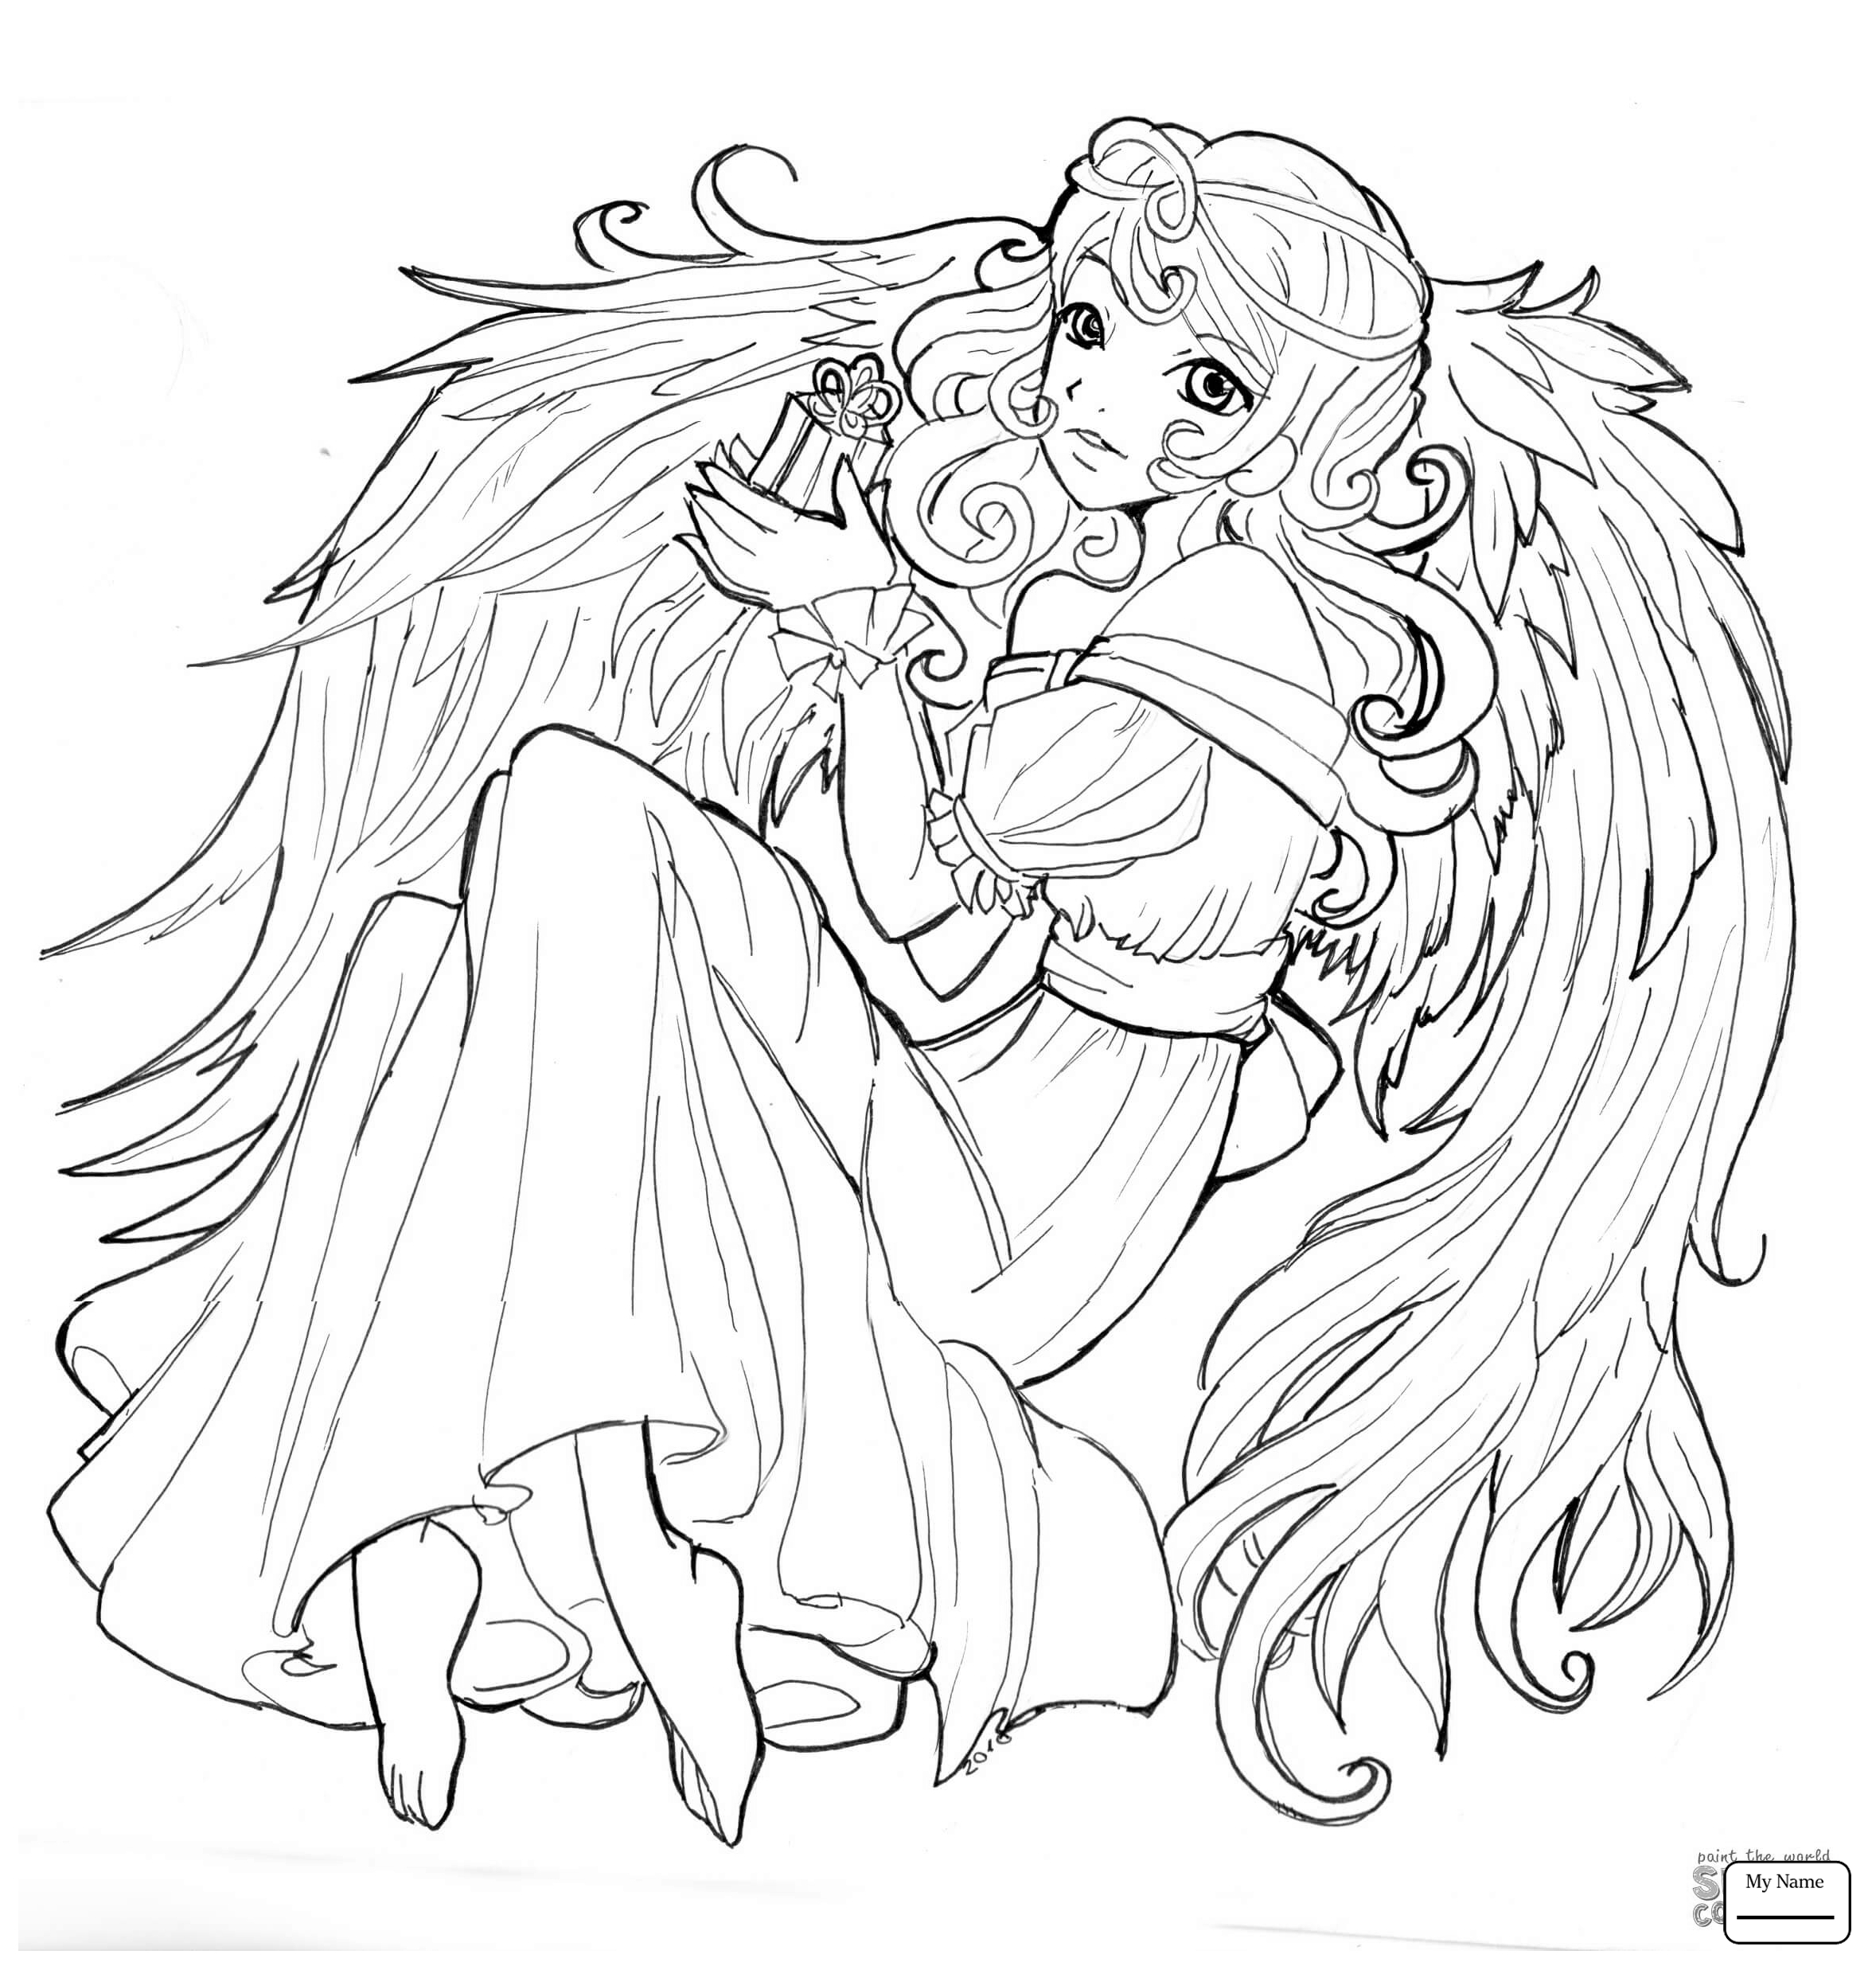 Demon Girl Coloring Pages